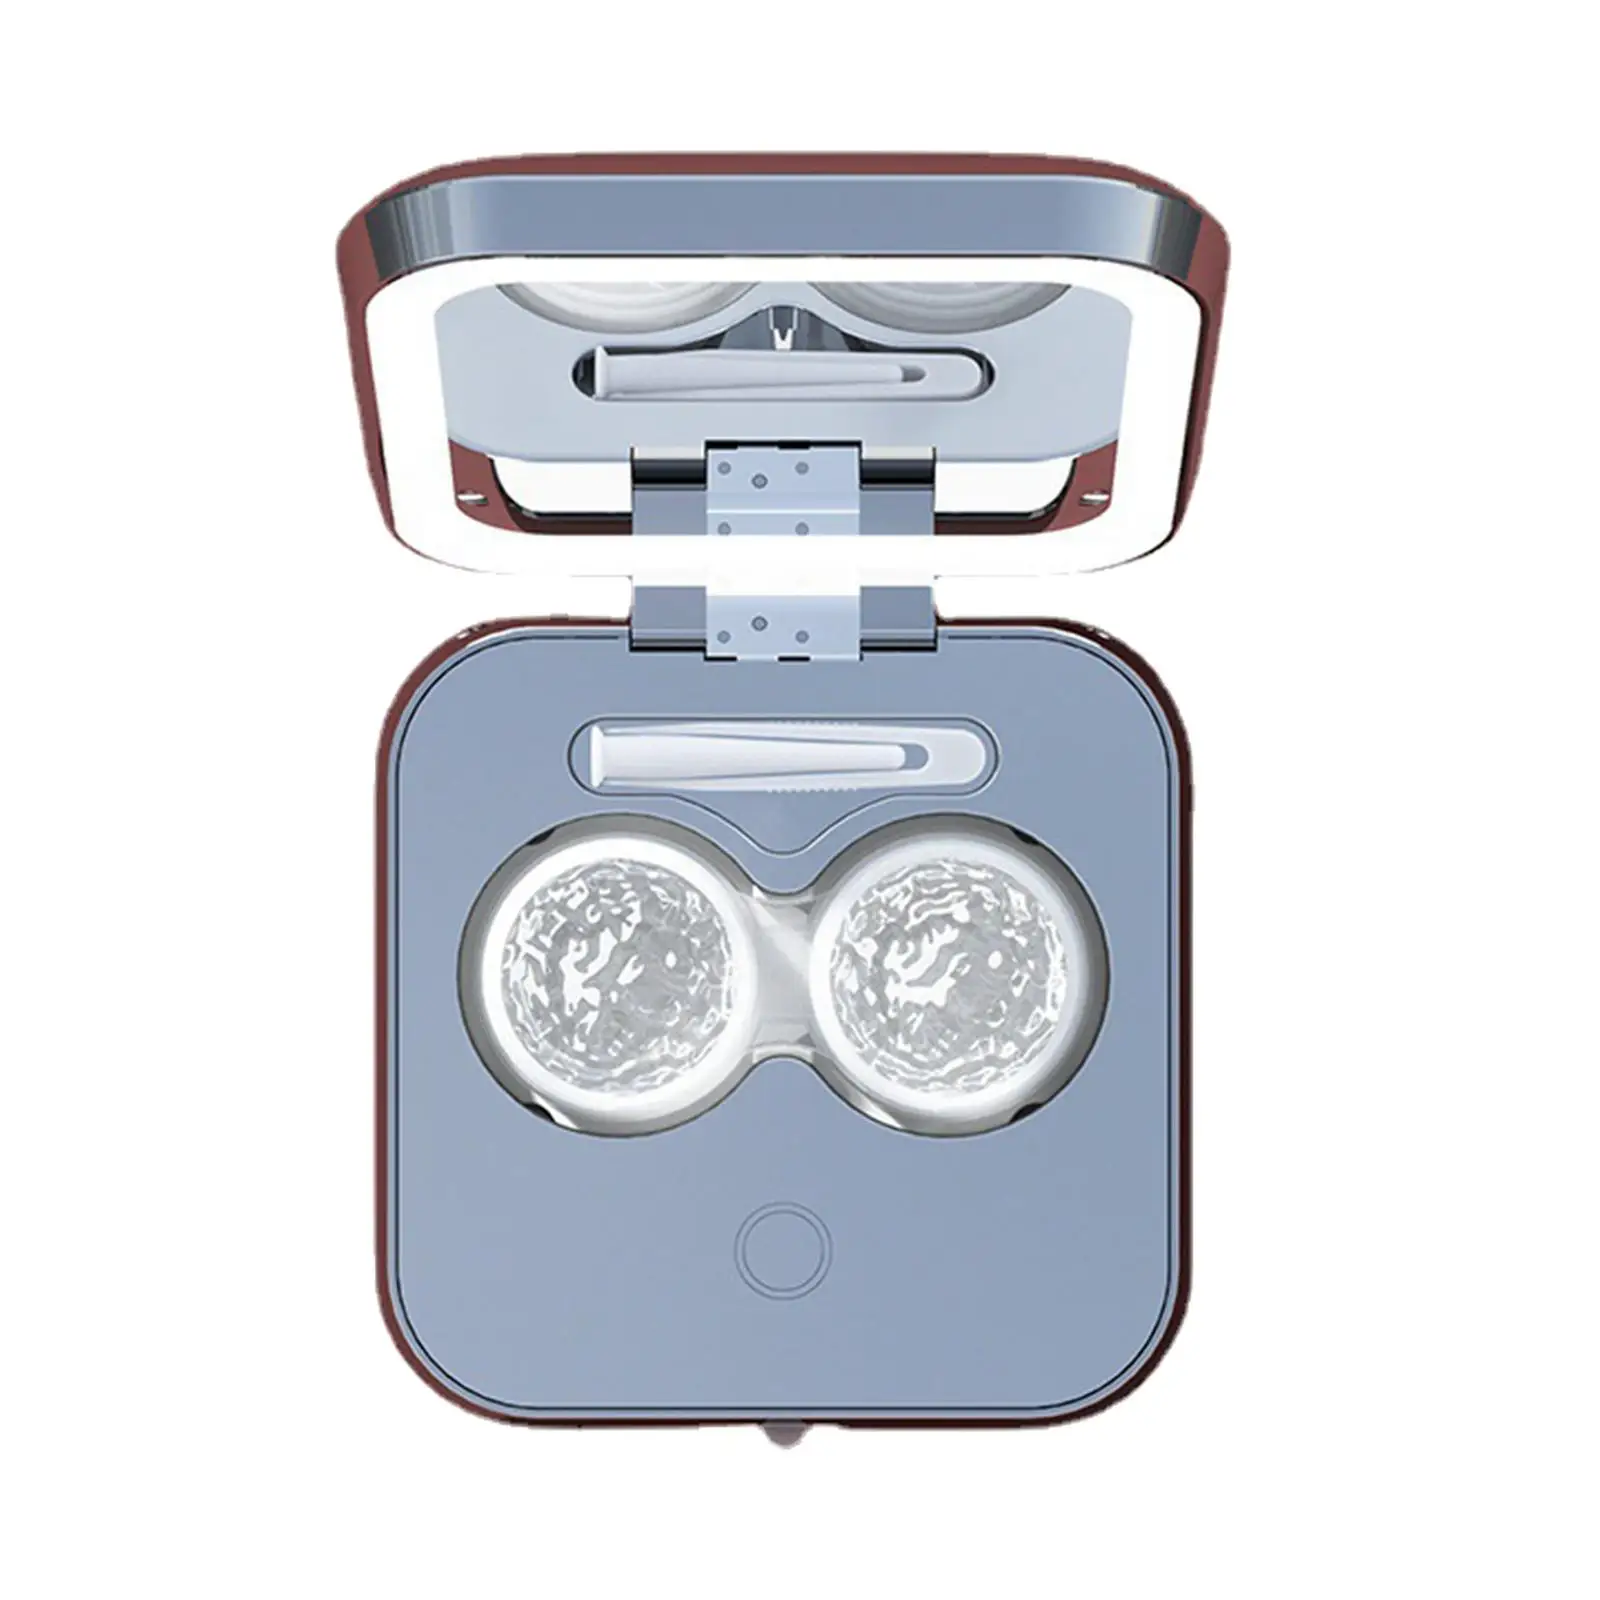 Contact Lens Ultrasonic Cleaning Machine USB Rechargeable Premium 2 Speeds Cleaning Modes with Mirror Tweezers Contact Lens Case